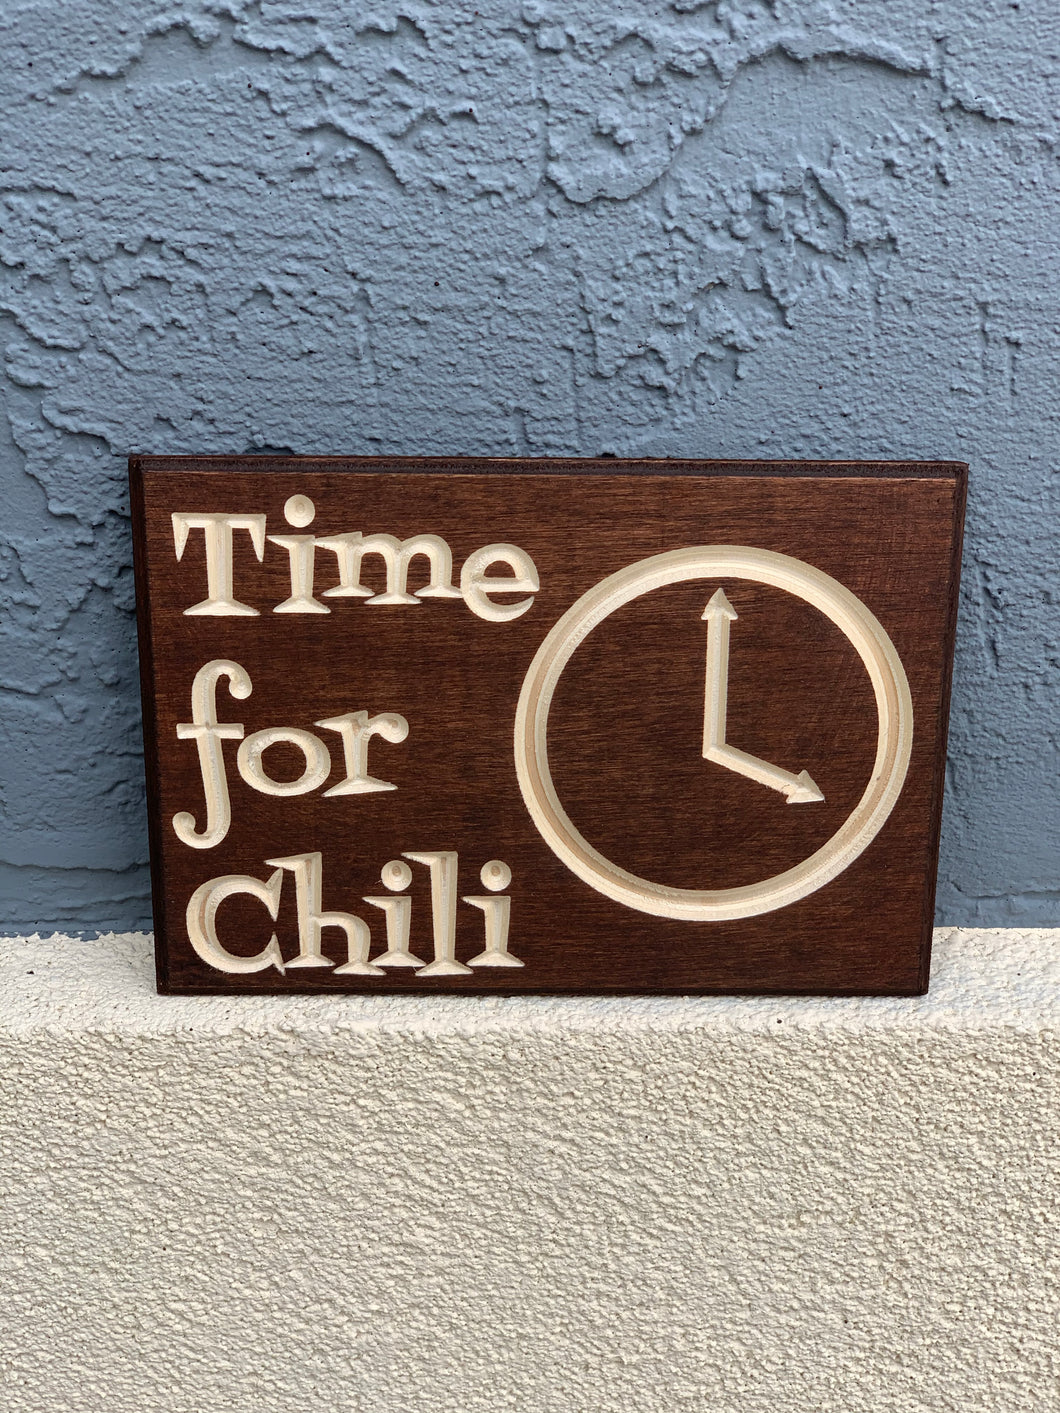 Time for Chili sign